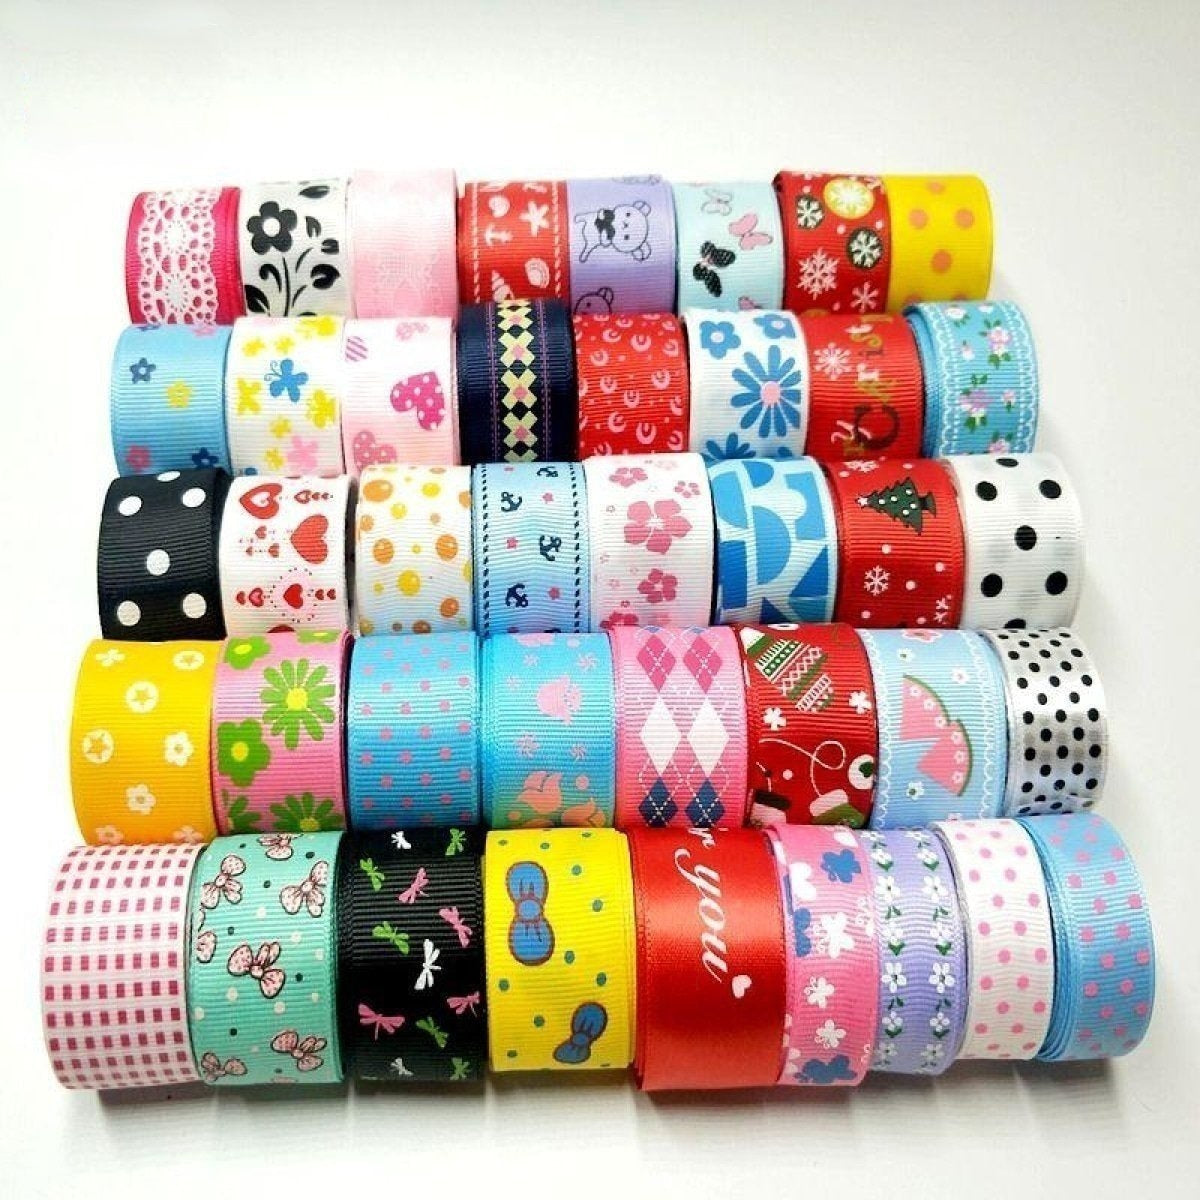 Ribbon Colourful Mixed Printed Satin Grosgrain Ribbons Hairband Diy Sewing Accessory Gift Wrap For